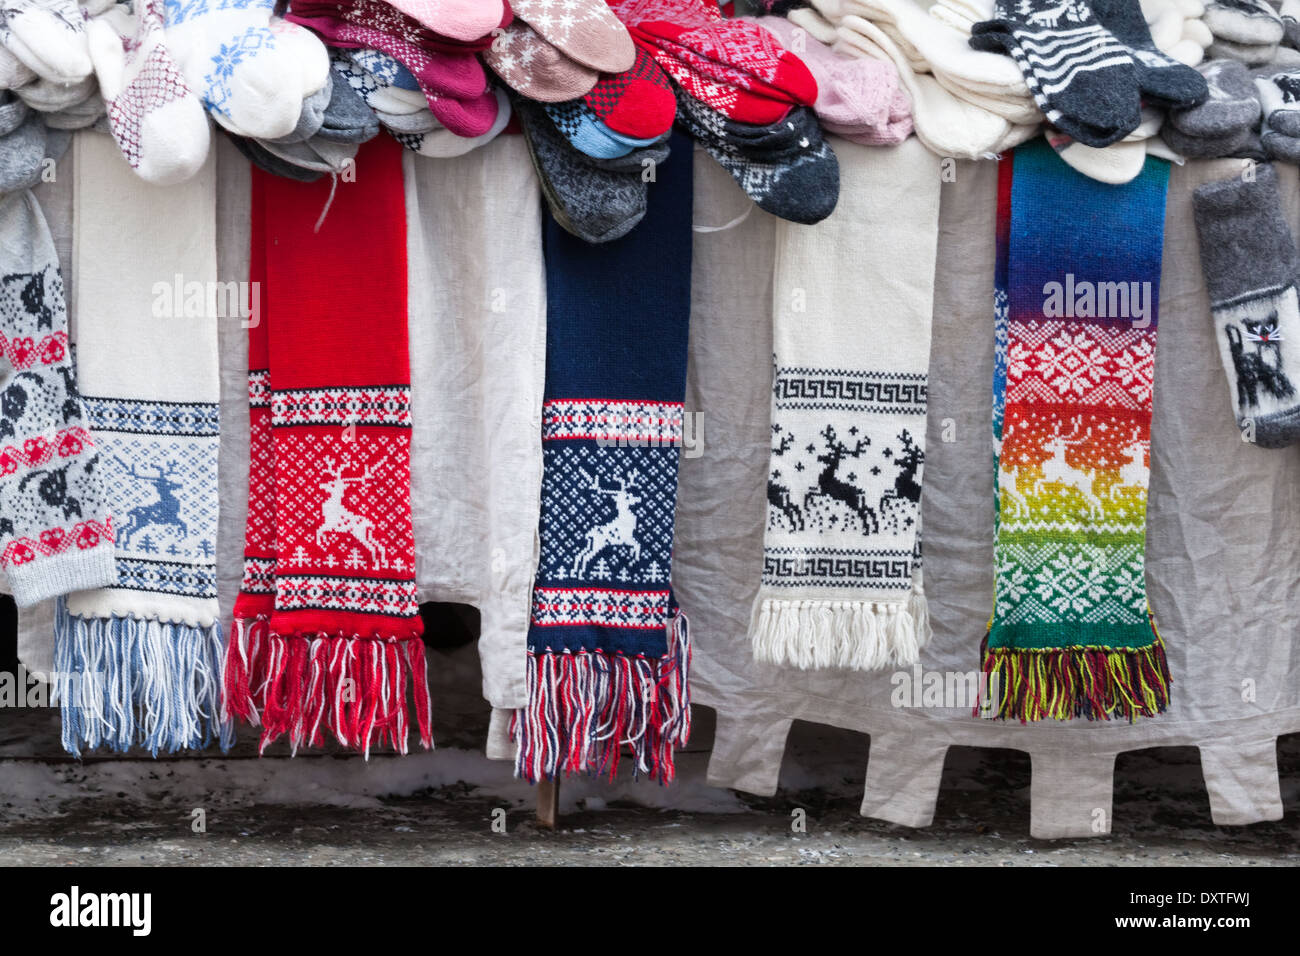 TALLINN, ESTONIA - MARCH 2013: Woolen scarves, socks and other souvenirs lie on the street counter on March 12, 2013 Stock Photo